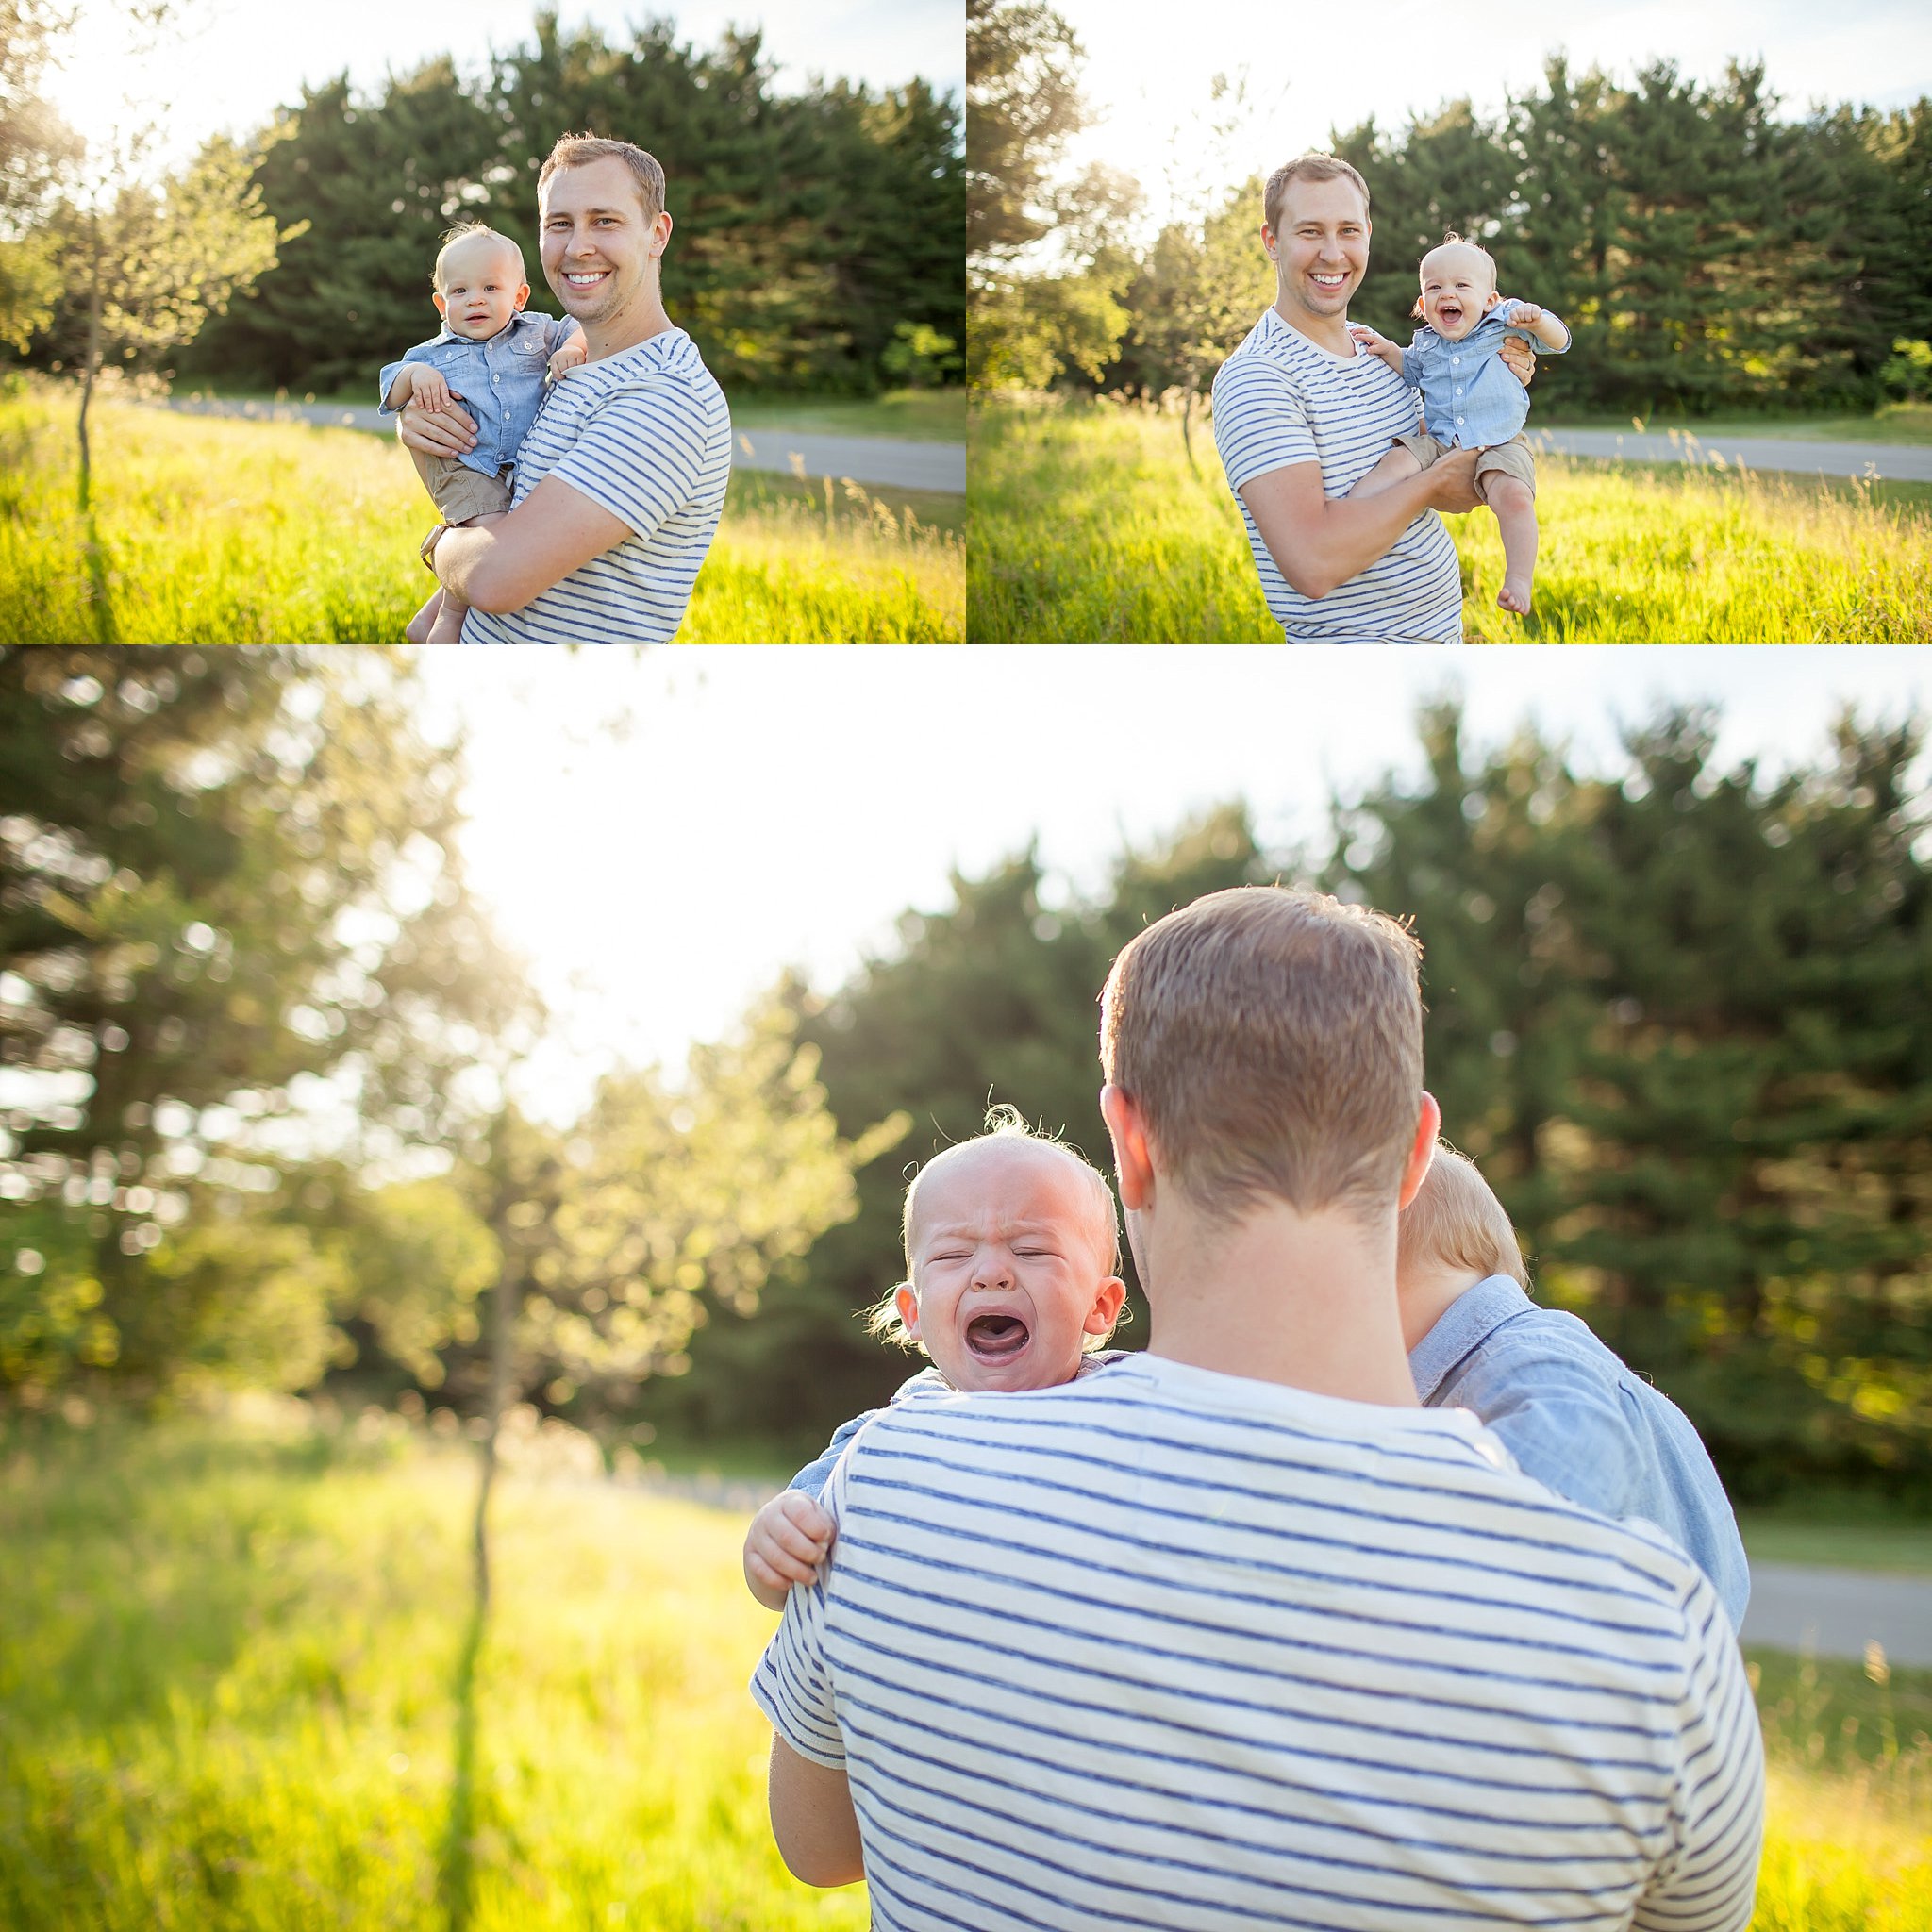 Family Session at St. Patrick's Park | South Bend Indiana Family Photographer | Toni Jay Photography